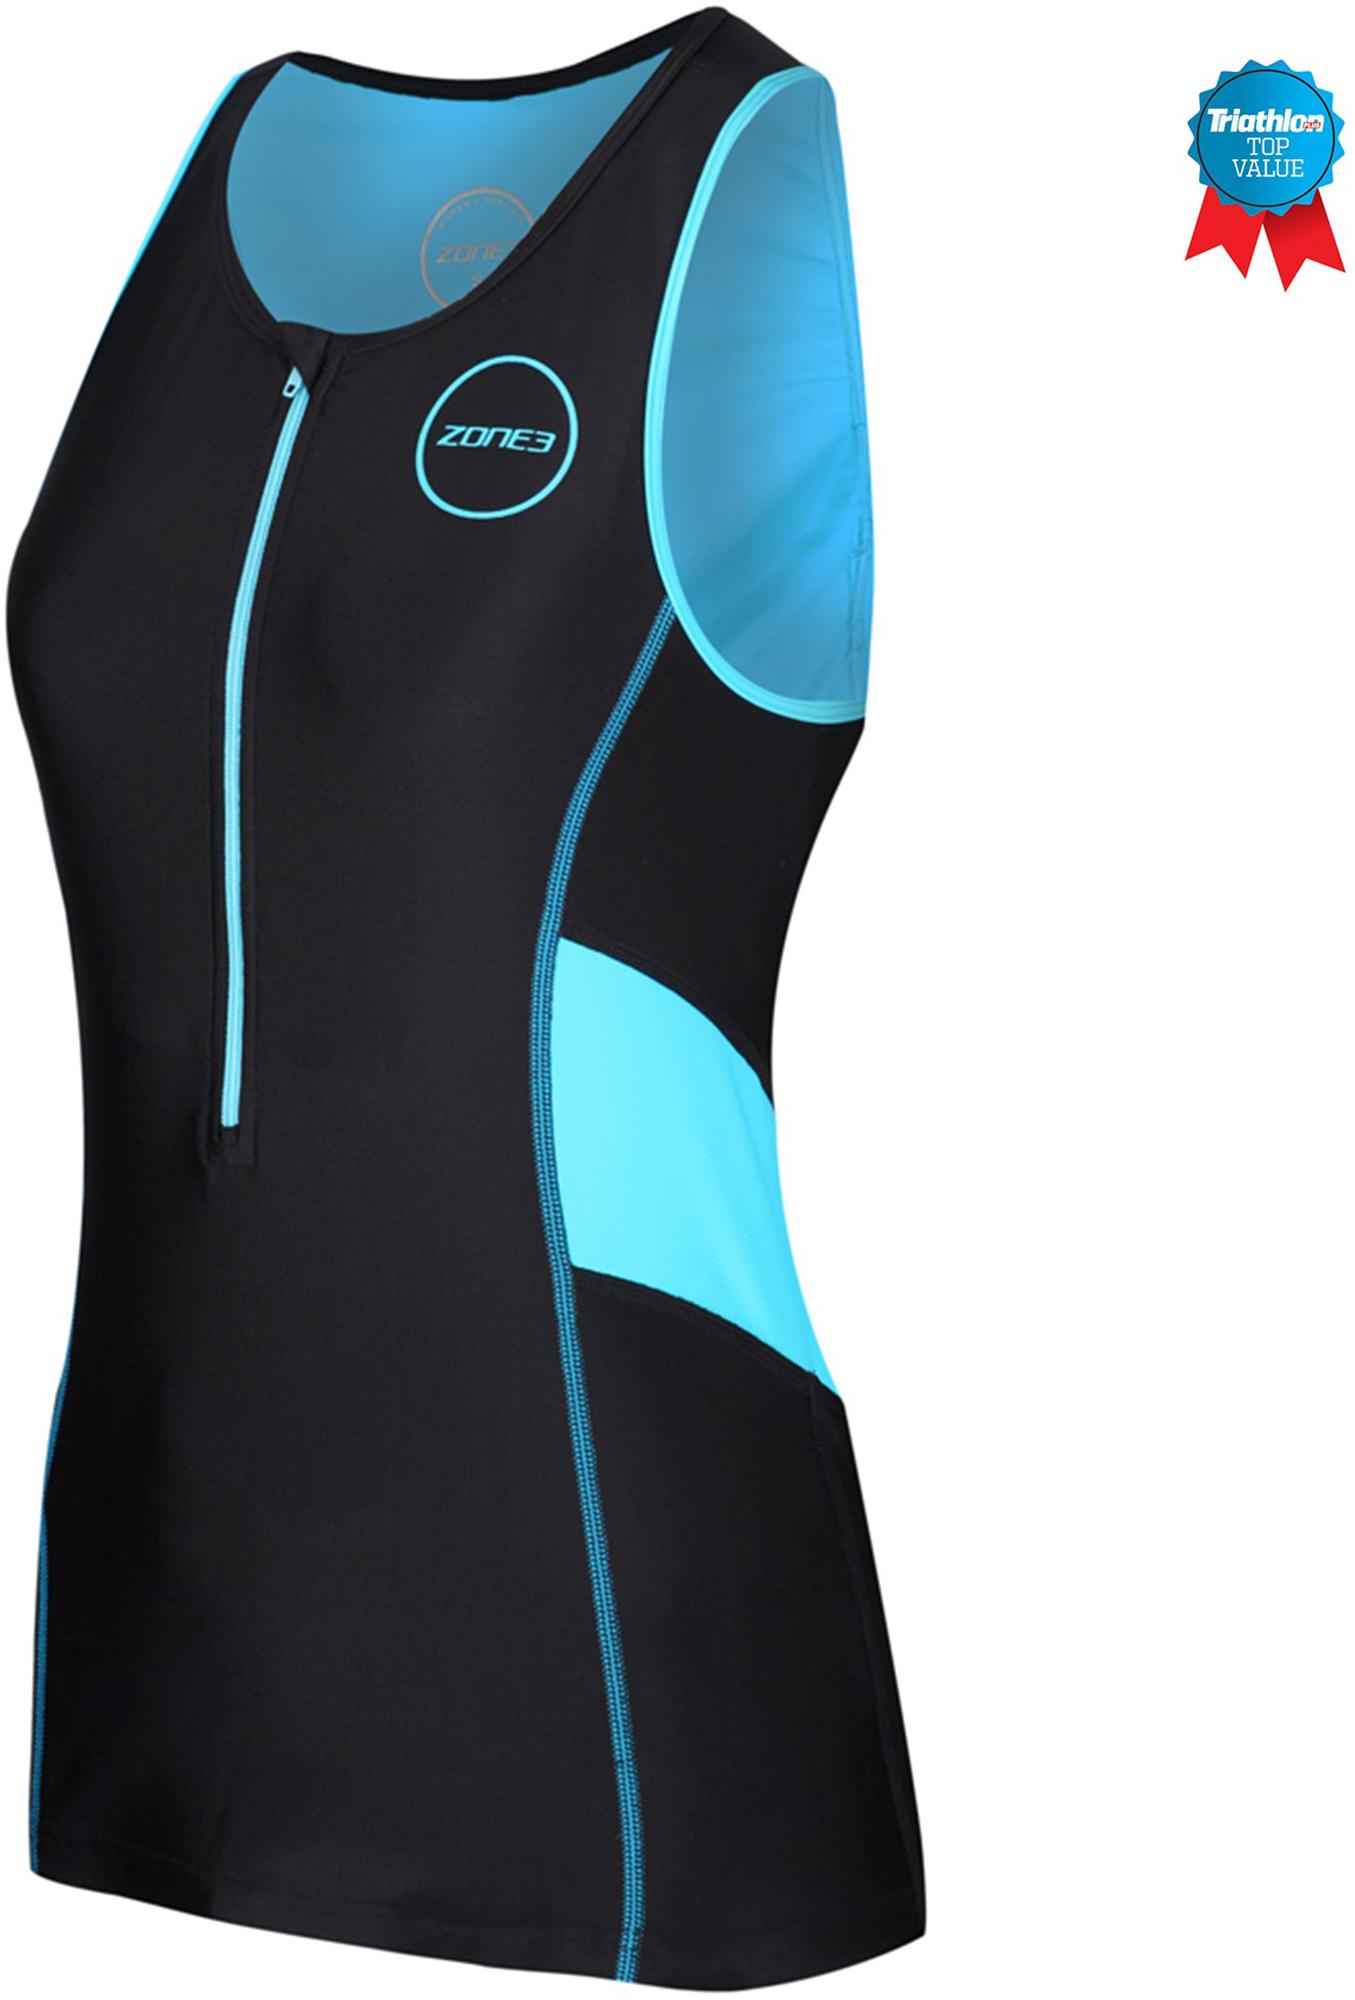 Zone3 Womens Activate Tri Top - Black/turquoise